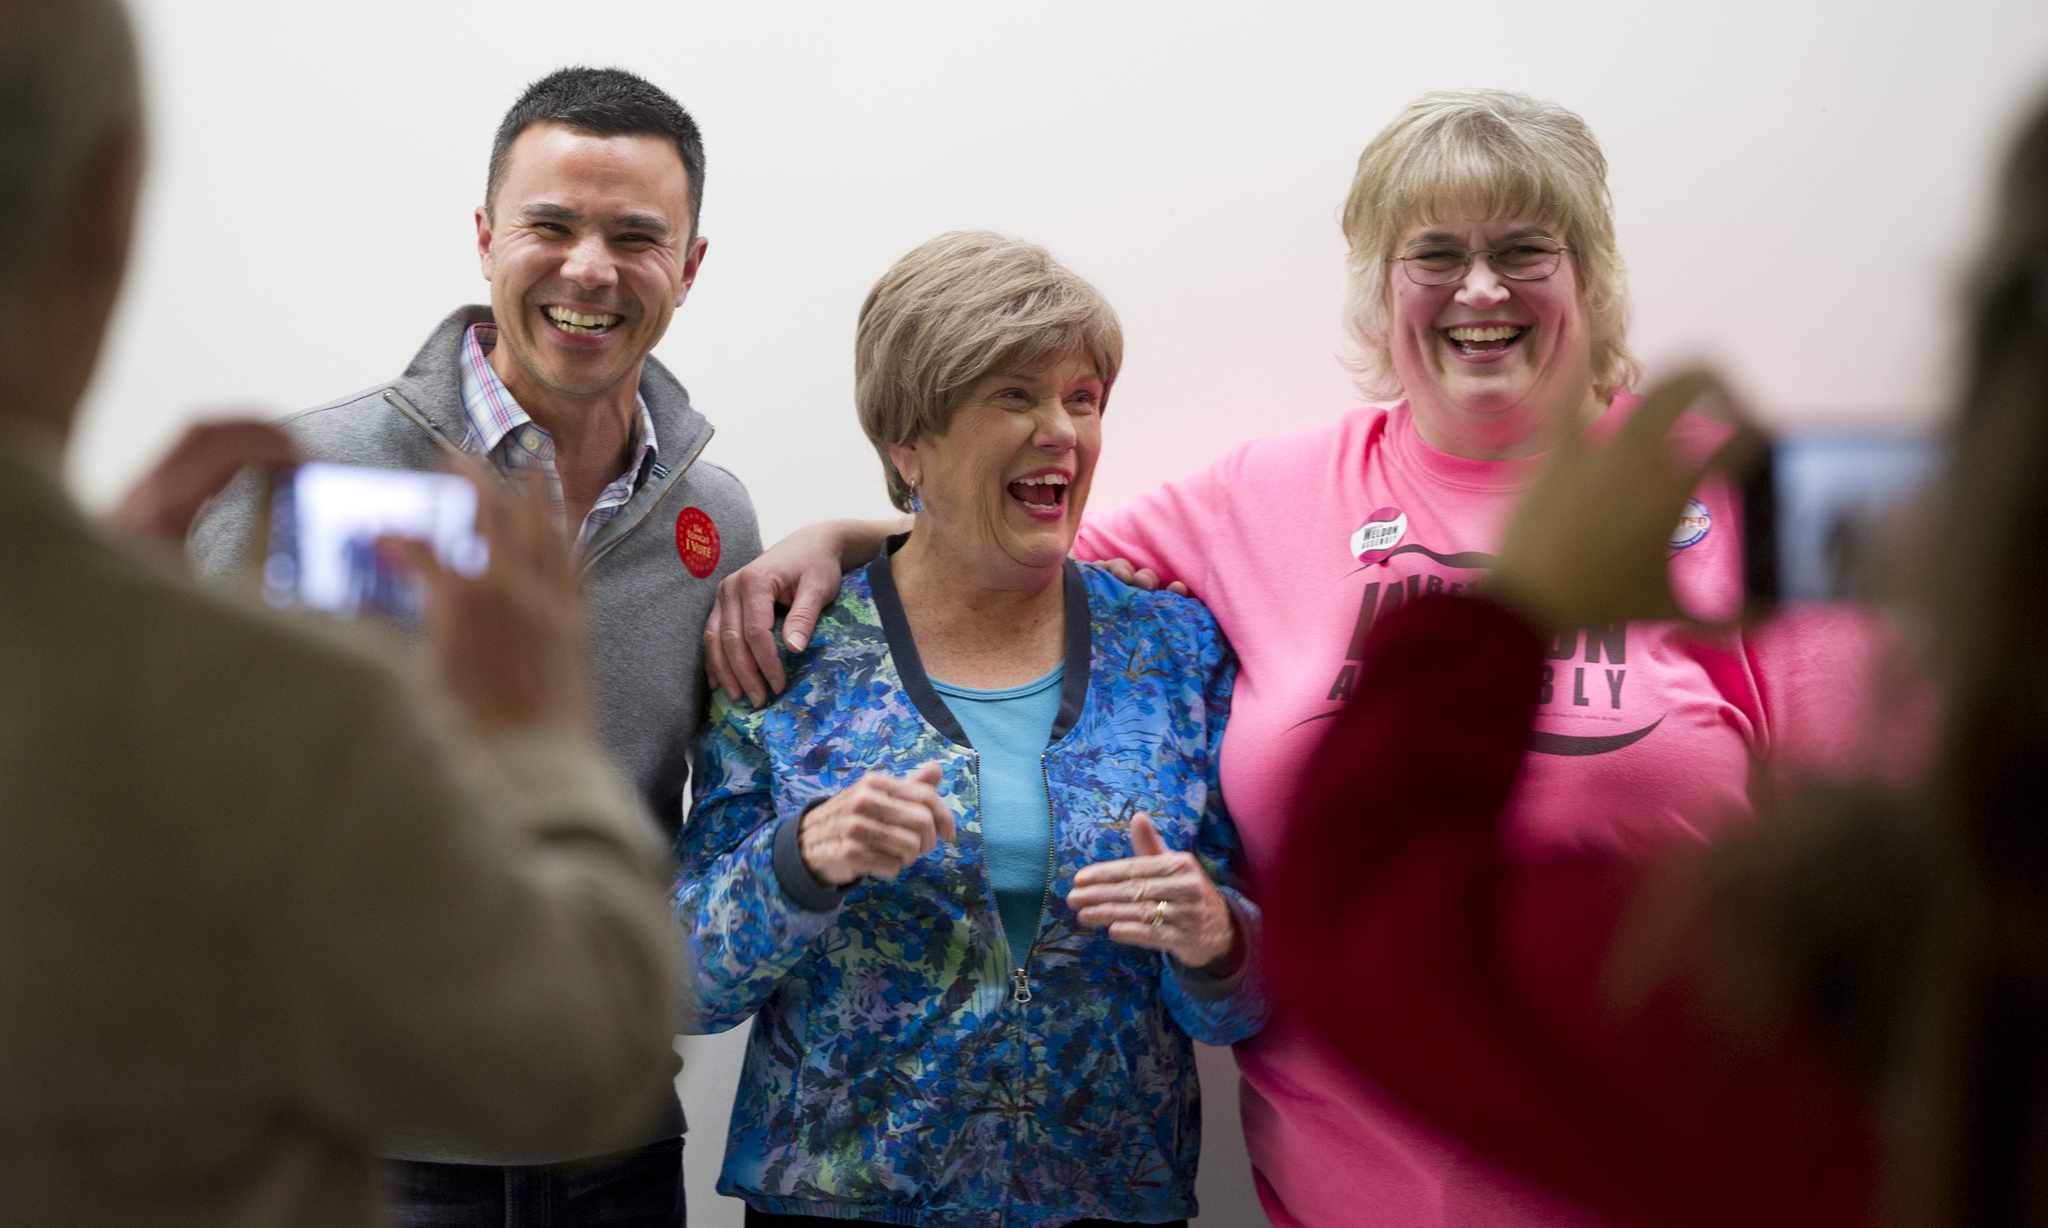 Norton Gregory, left, Mary Becker, center, and Beth Weldon pose for pictures in the Assembly chambers after winning their respective Assembly seats in the municipal election on Oct. 4, 2016. (Michael Penn | Juneau Empire)